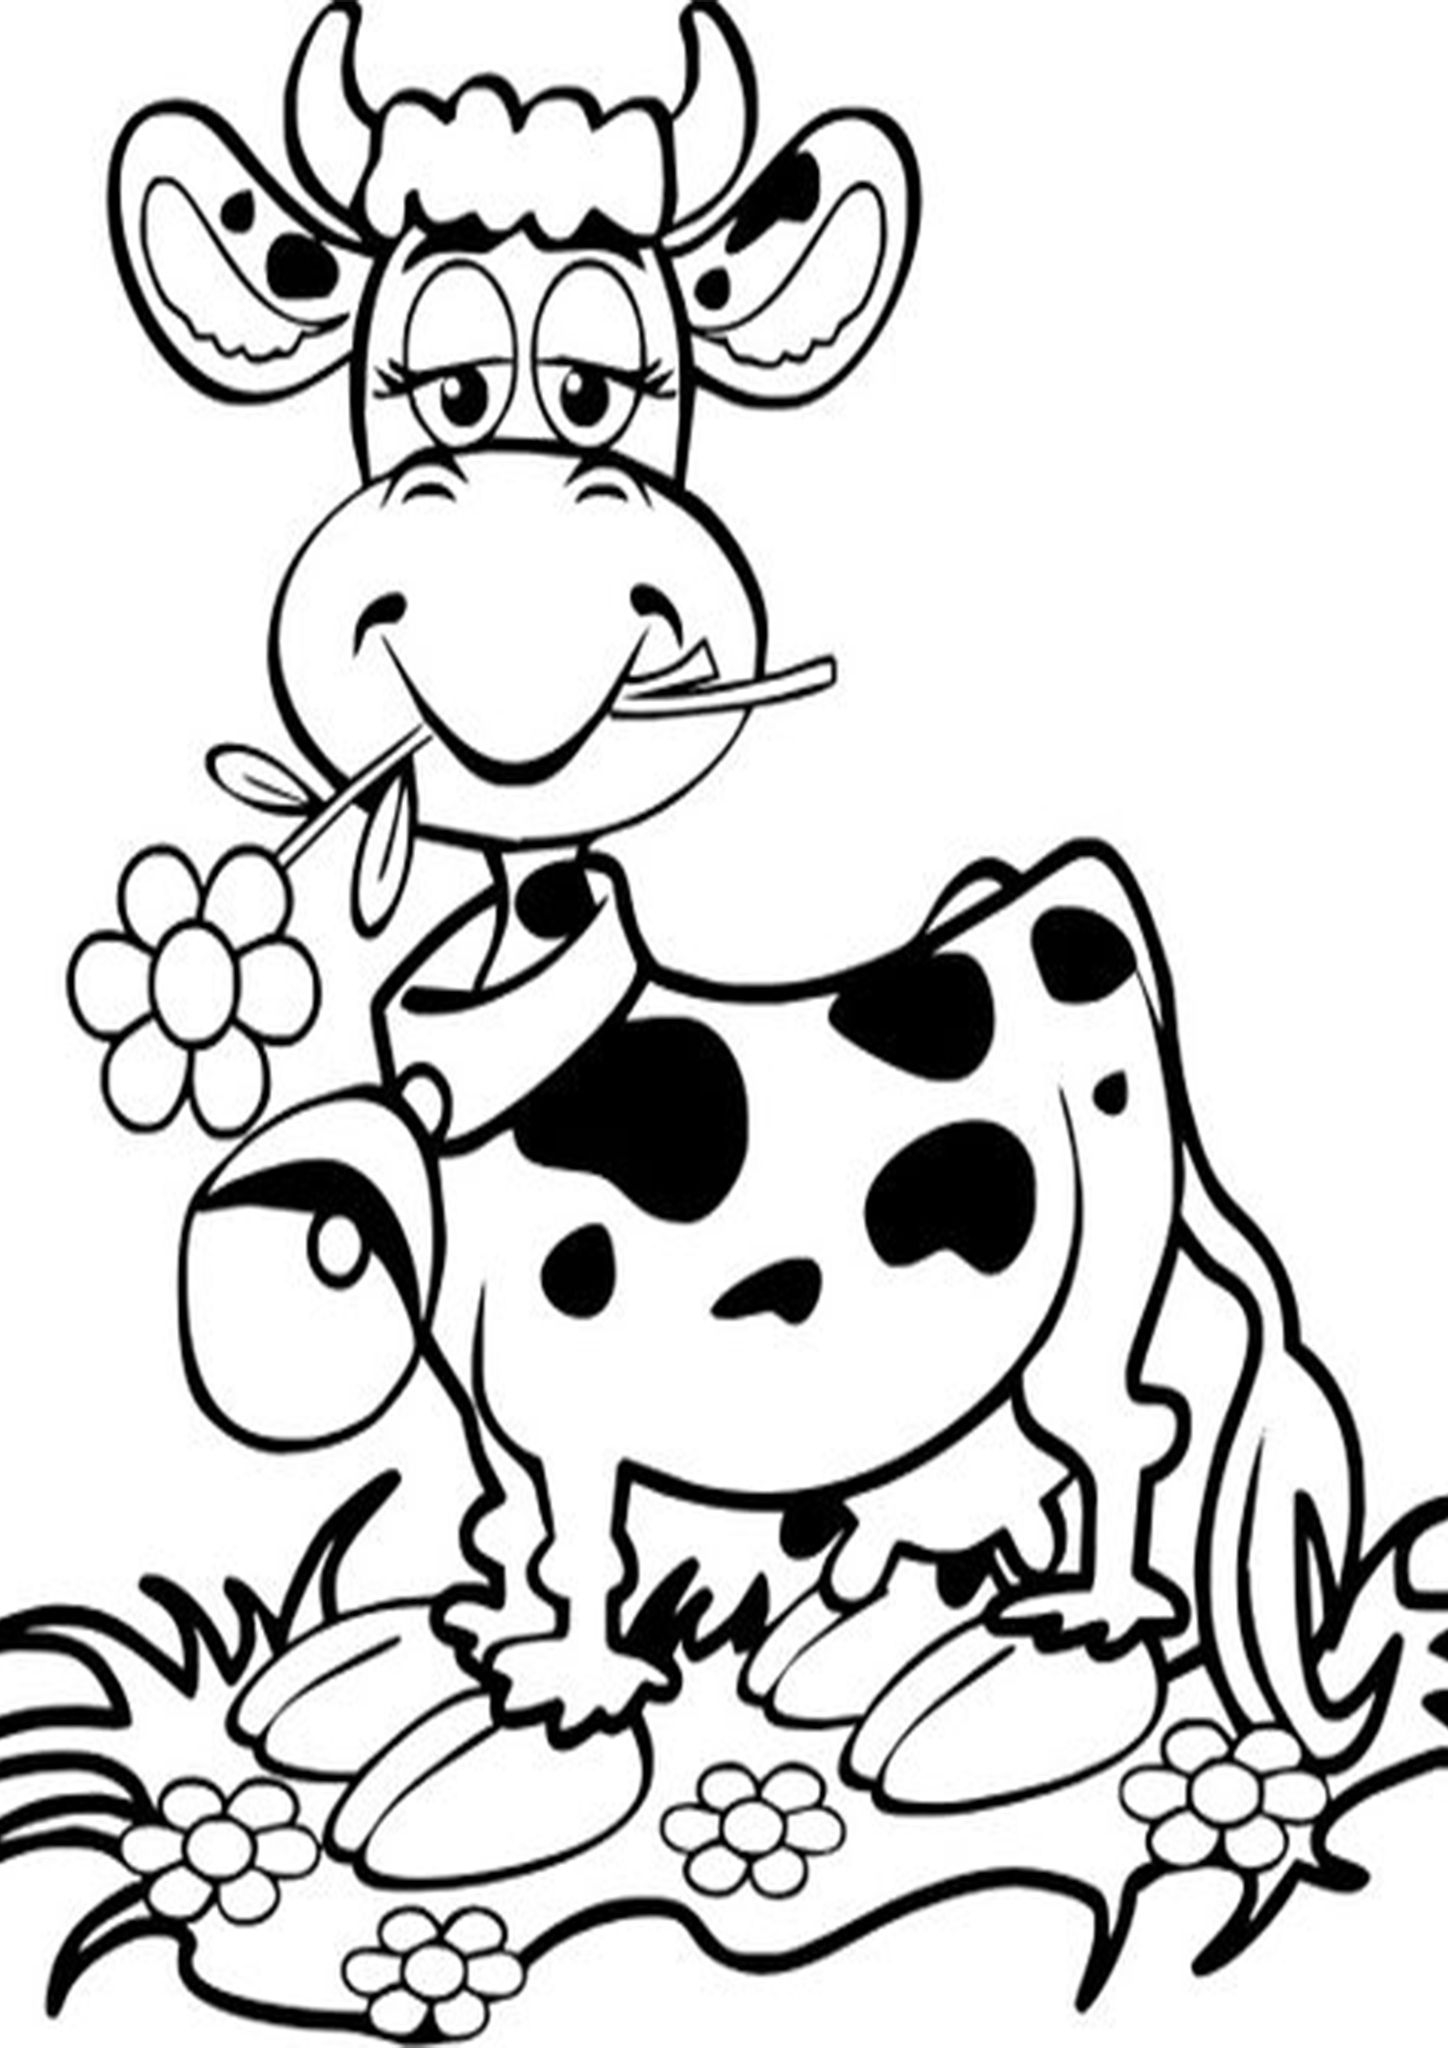 Free Easy To Print Cow Coloring Pages Cow Coloring Pages Farm Coloring Pages Coloring Pages - Coloring Pages of Cows Free Printable